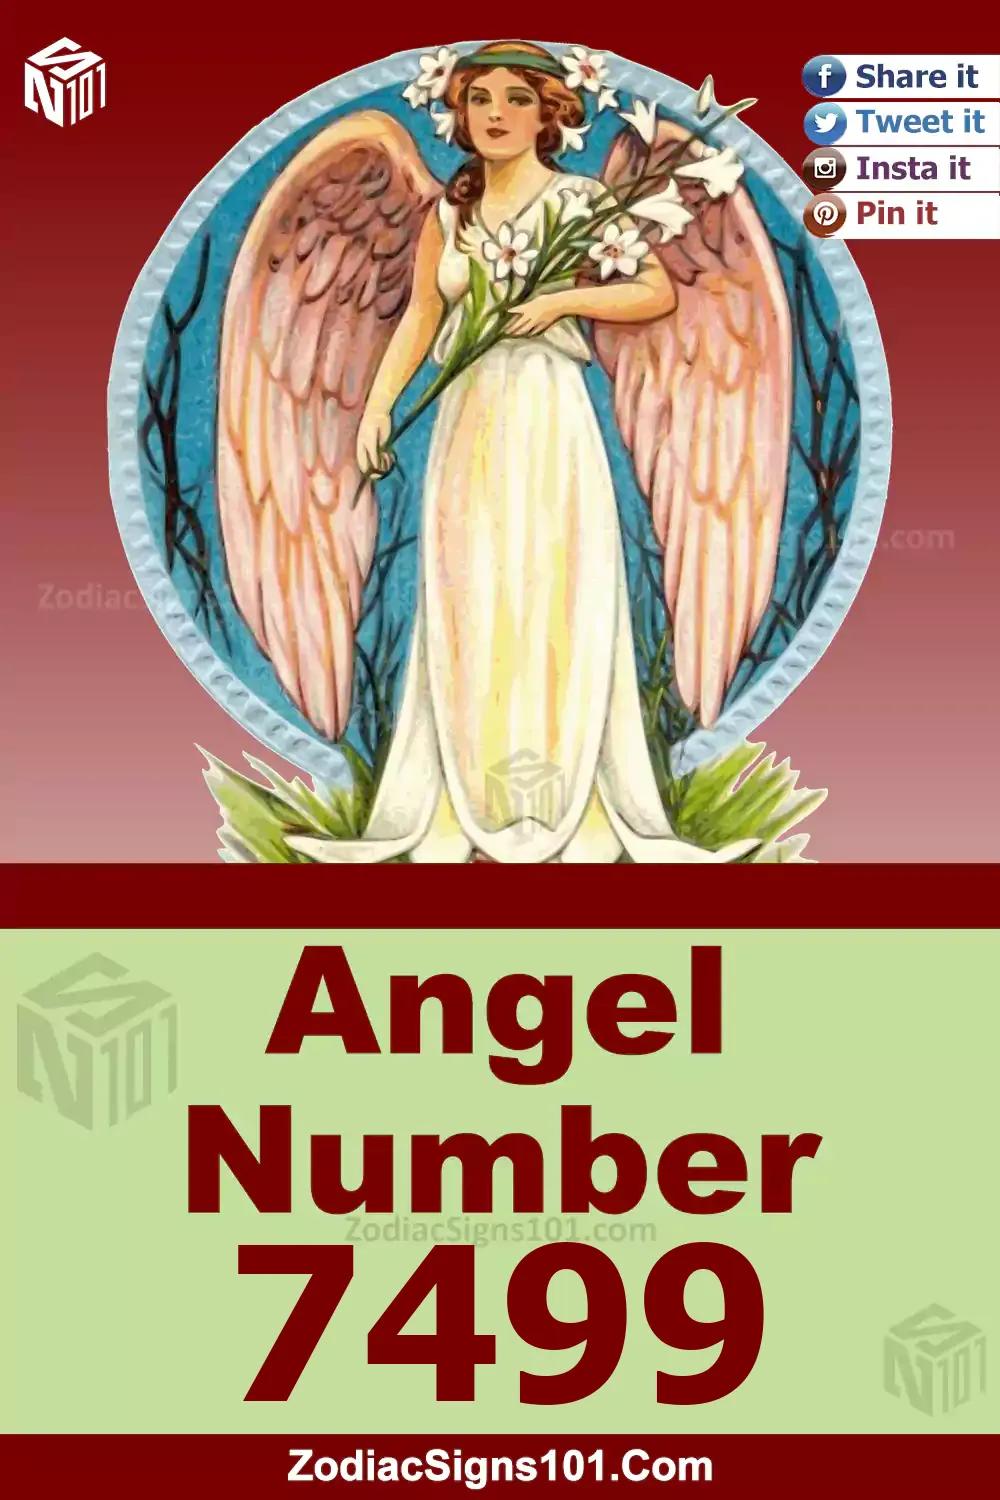 7499 Angel Number Meaning